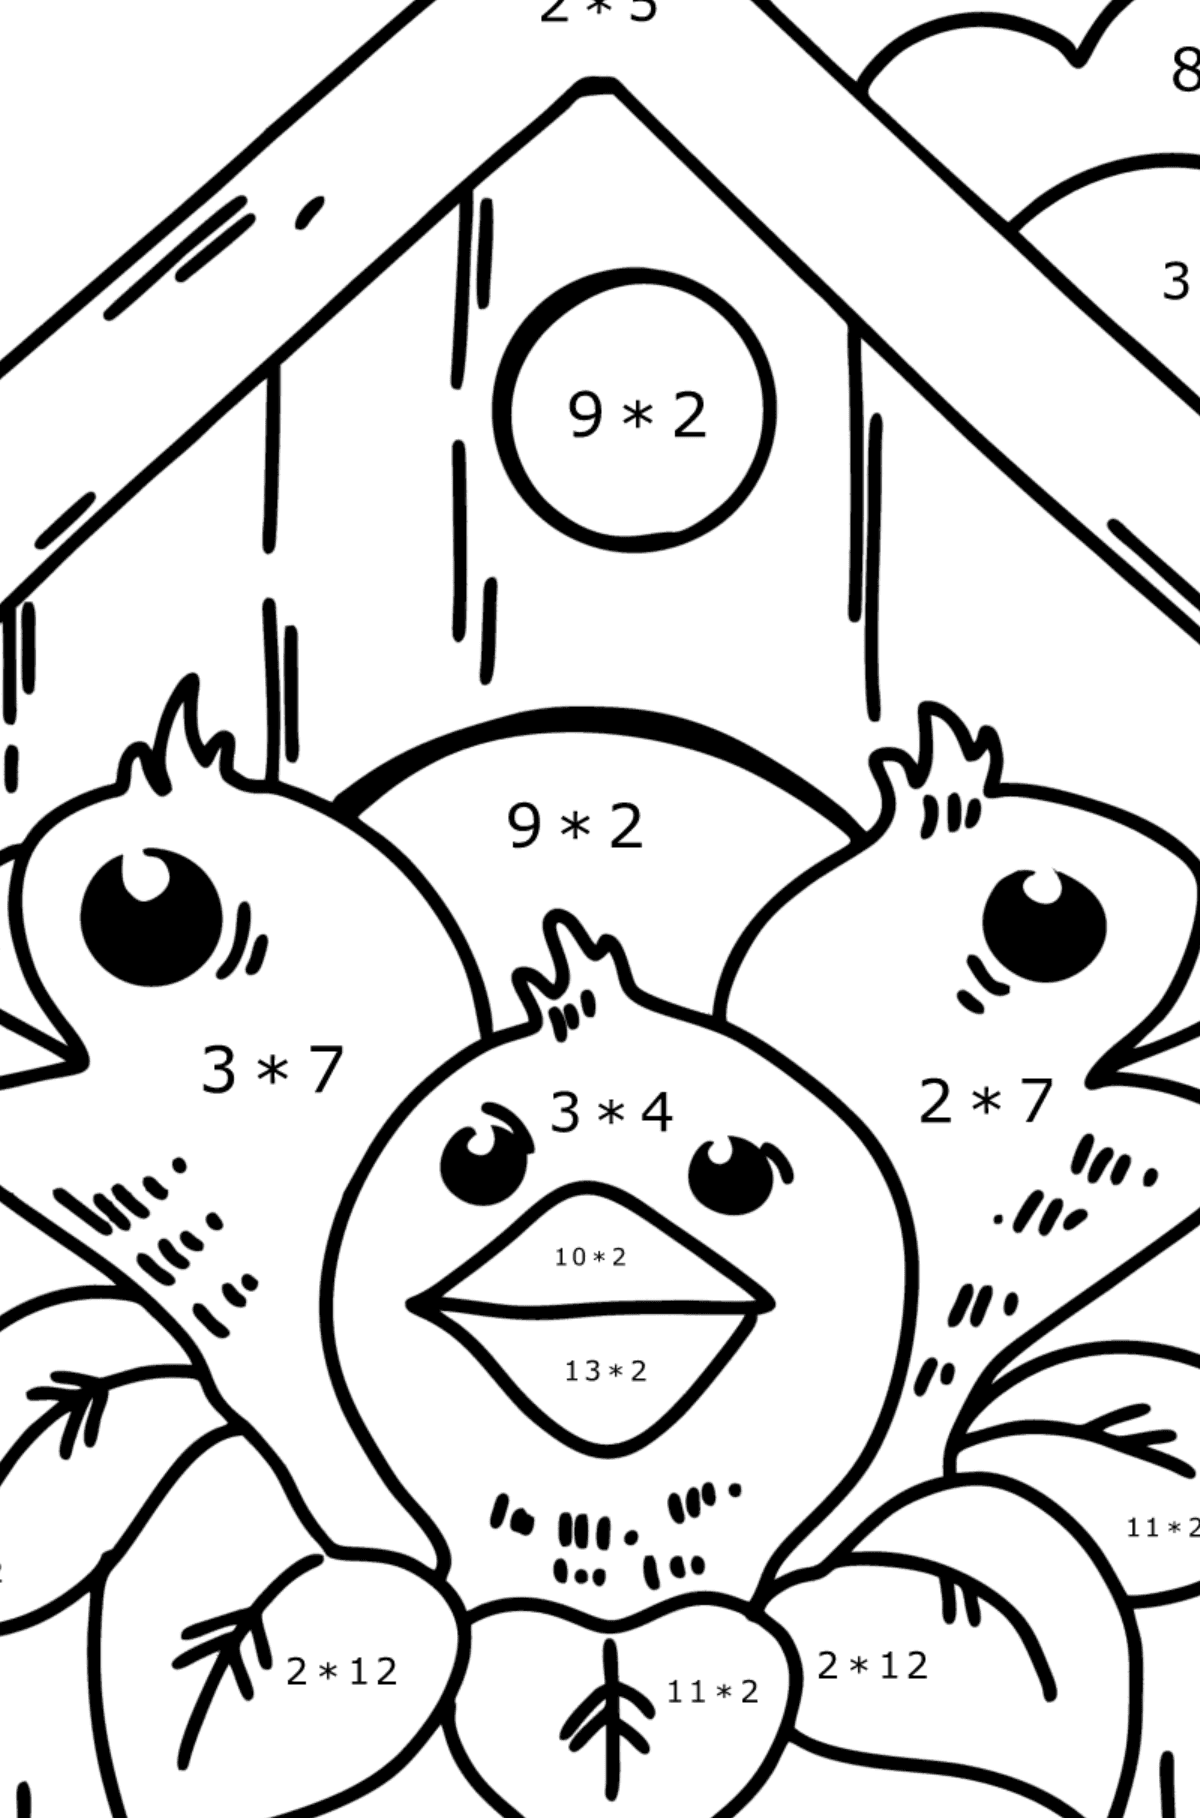 Chicks in a Birdhouse coloring page - Math Coloring - Multiplication for Kids